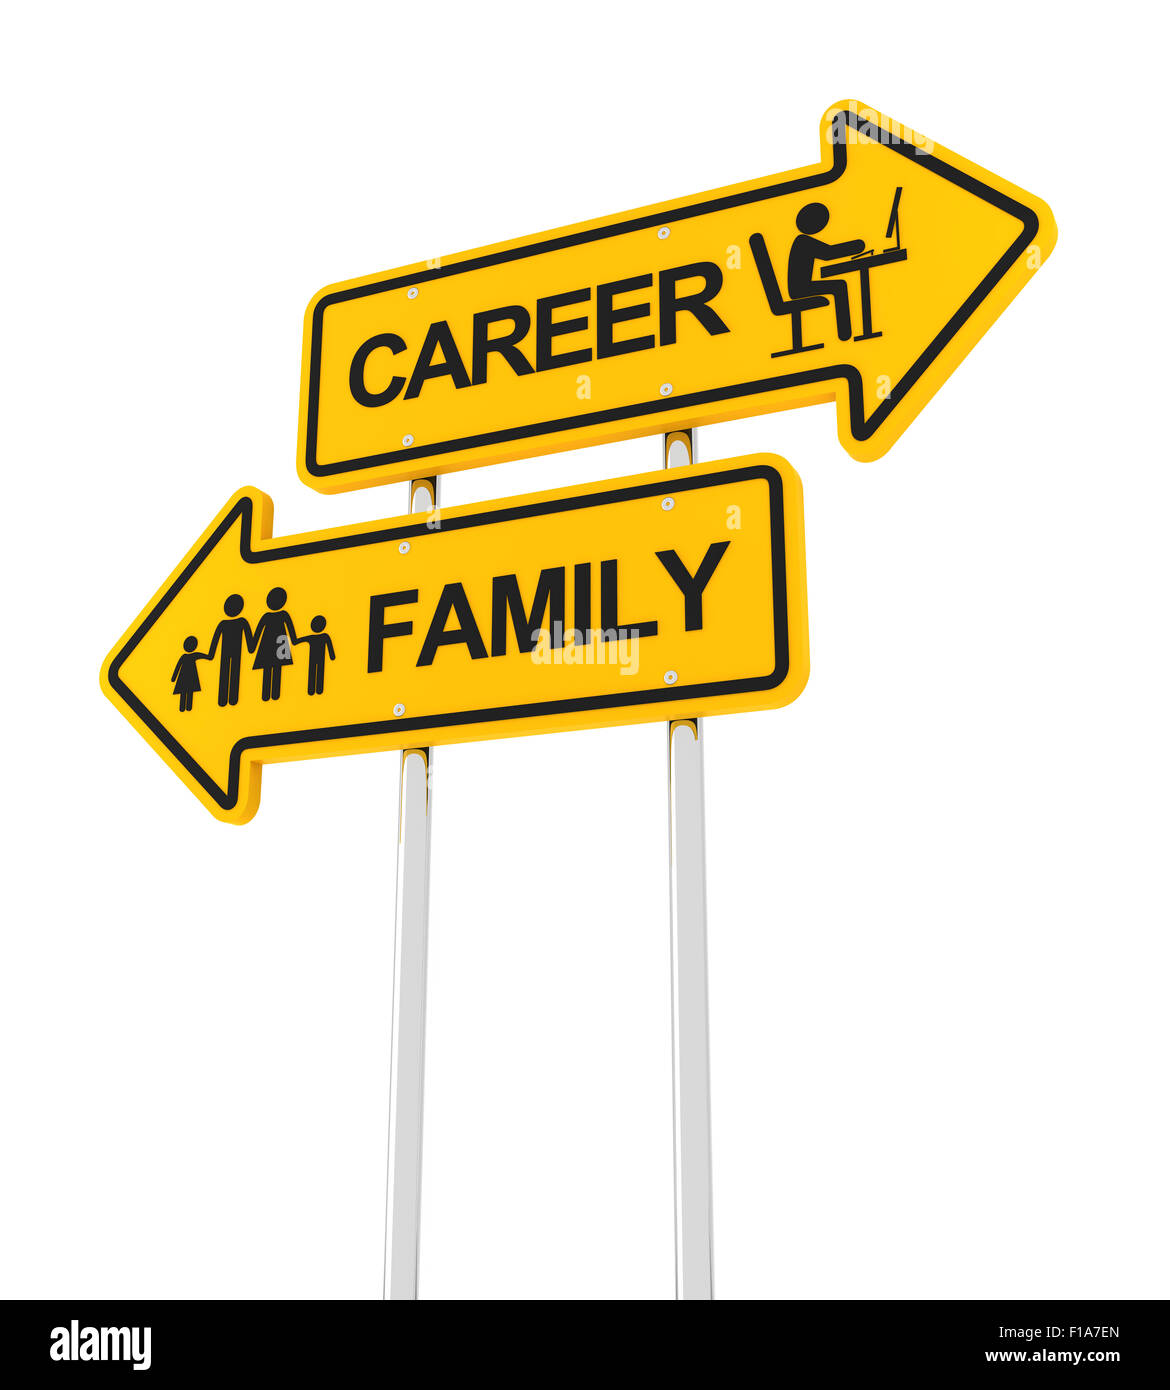 Career or family Stock Photo